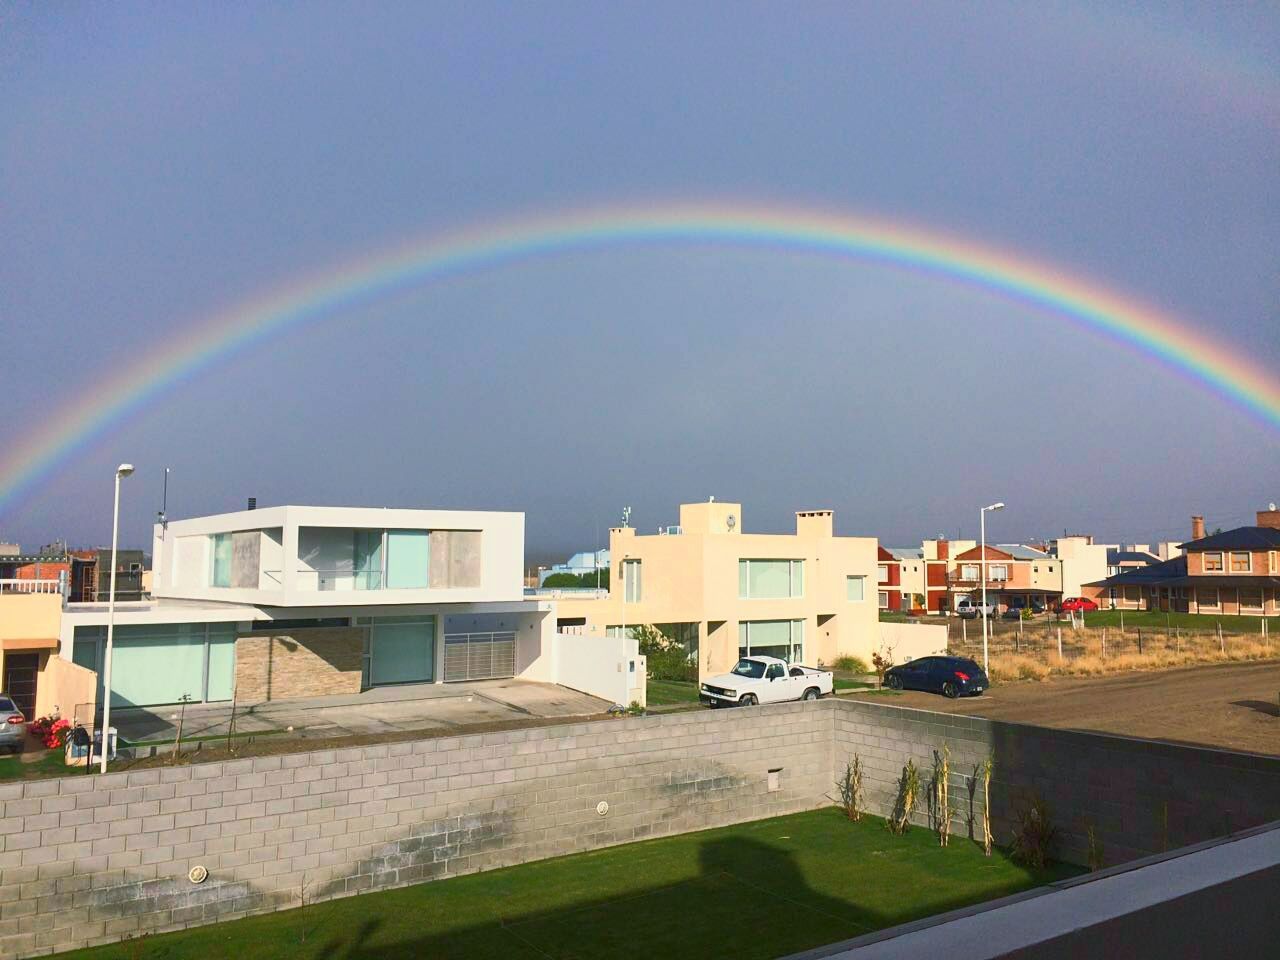 VIEW OF RAINBOW OVER HOUSES